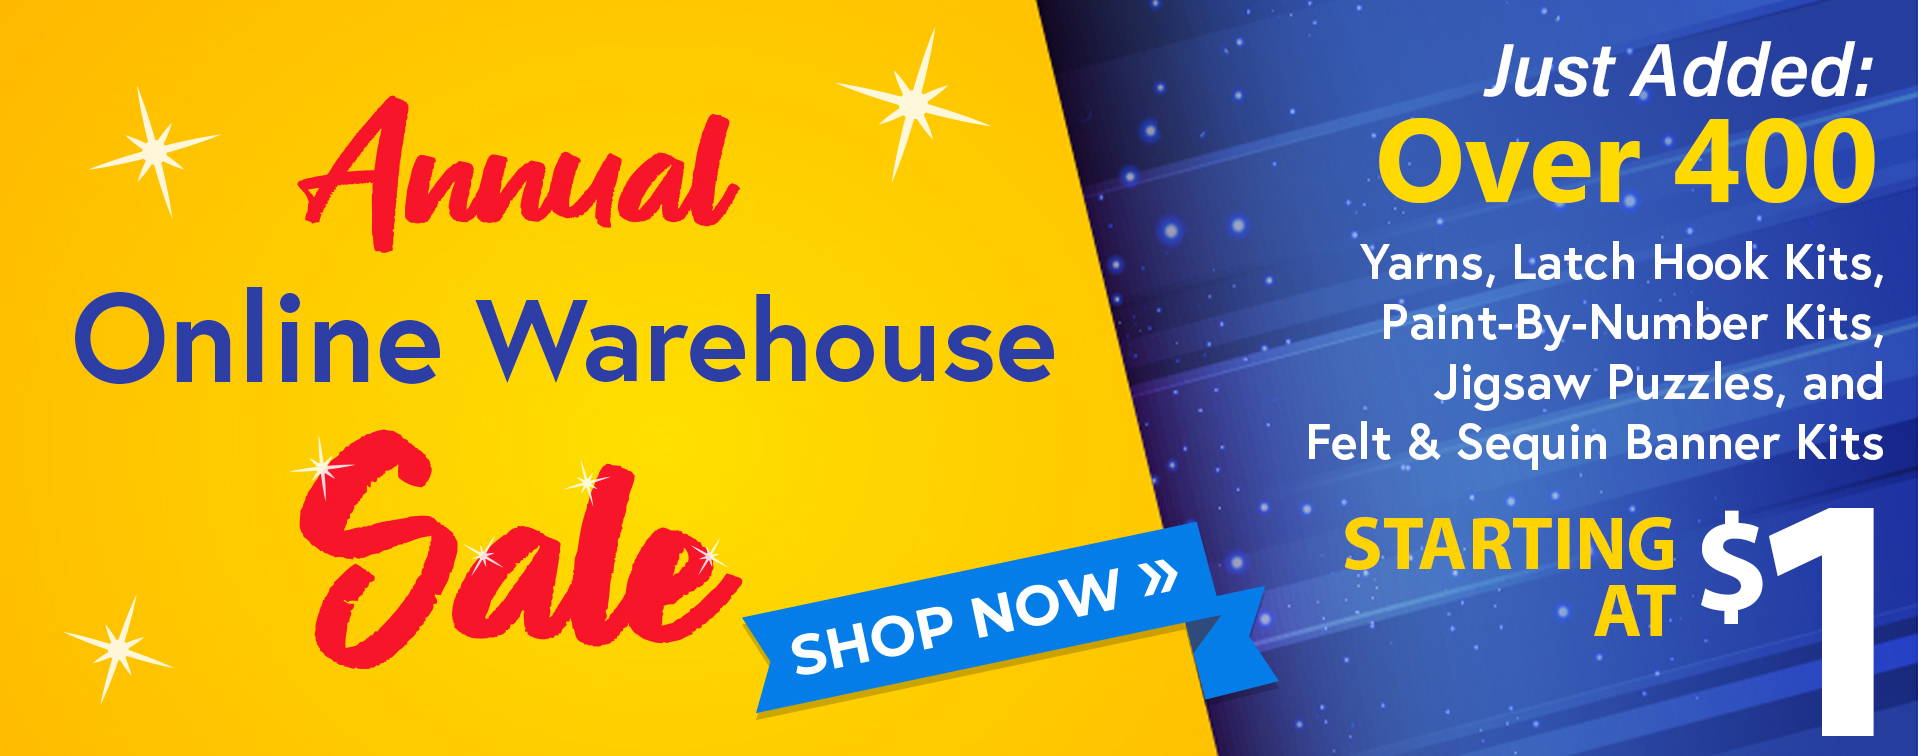 Annual Online Warehouse Sale.